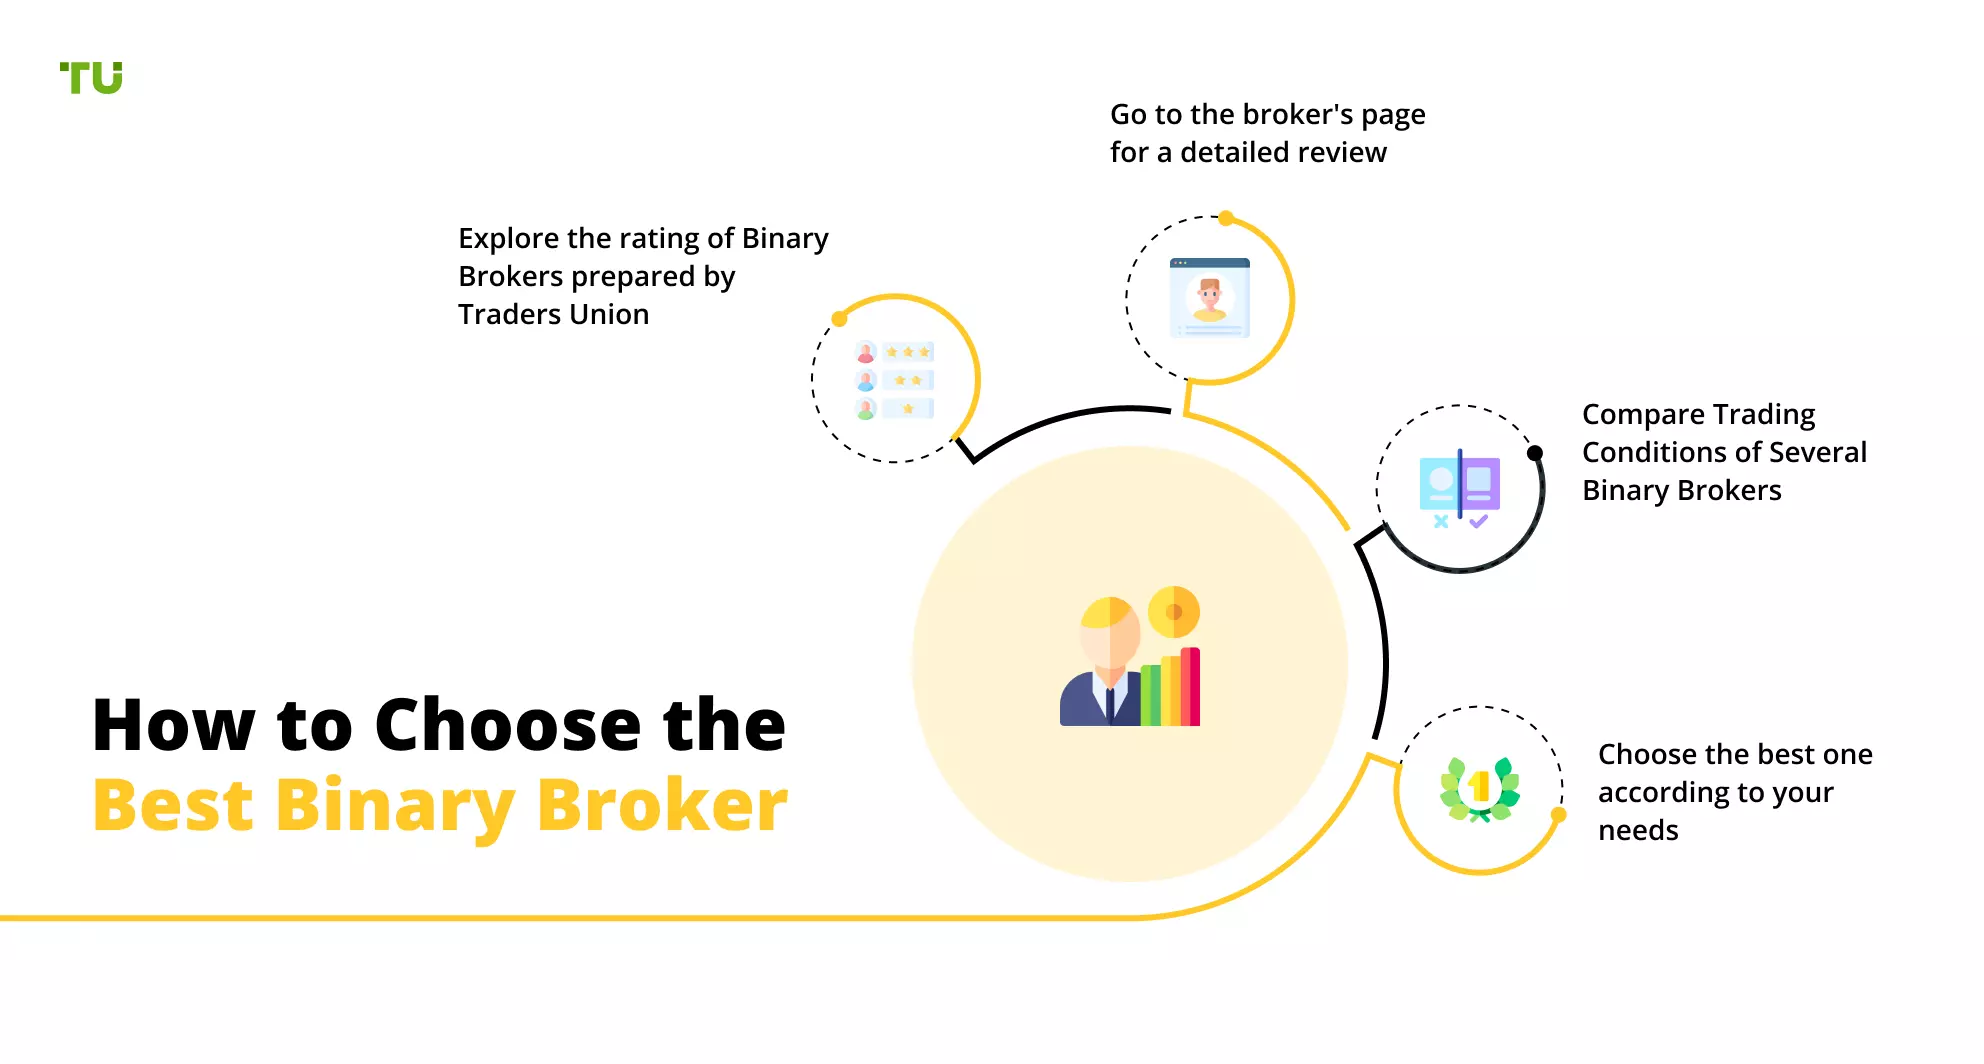 How to Choose the Best Binary Broker